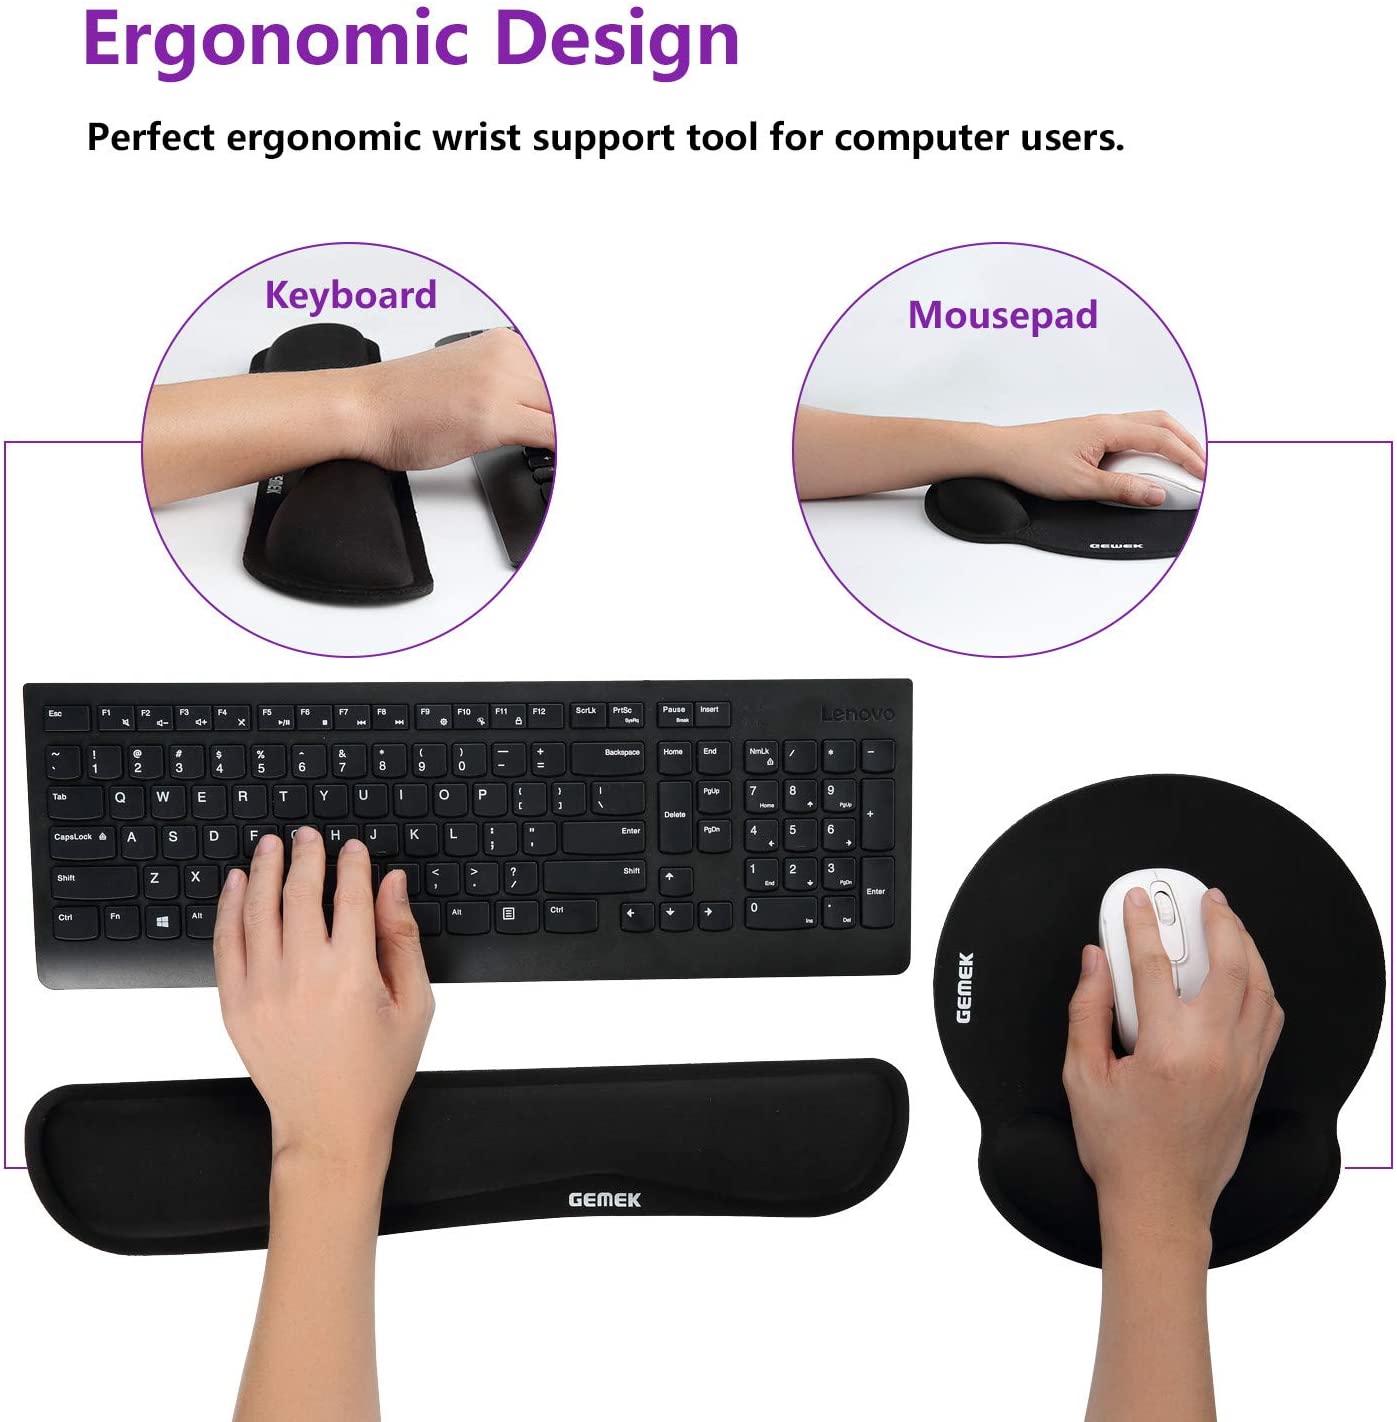 GEMEK Mouse Pad & Keyboard Wrist Rest Support for Gaming/Computer/Laptop, Memory Foam Set for Easy Typing&Relief Getting Hand Hurt and Carpal Tunnel Syndrome Pain - e4cents